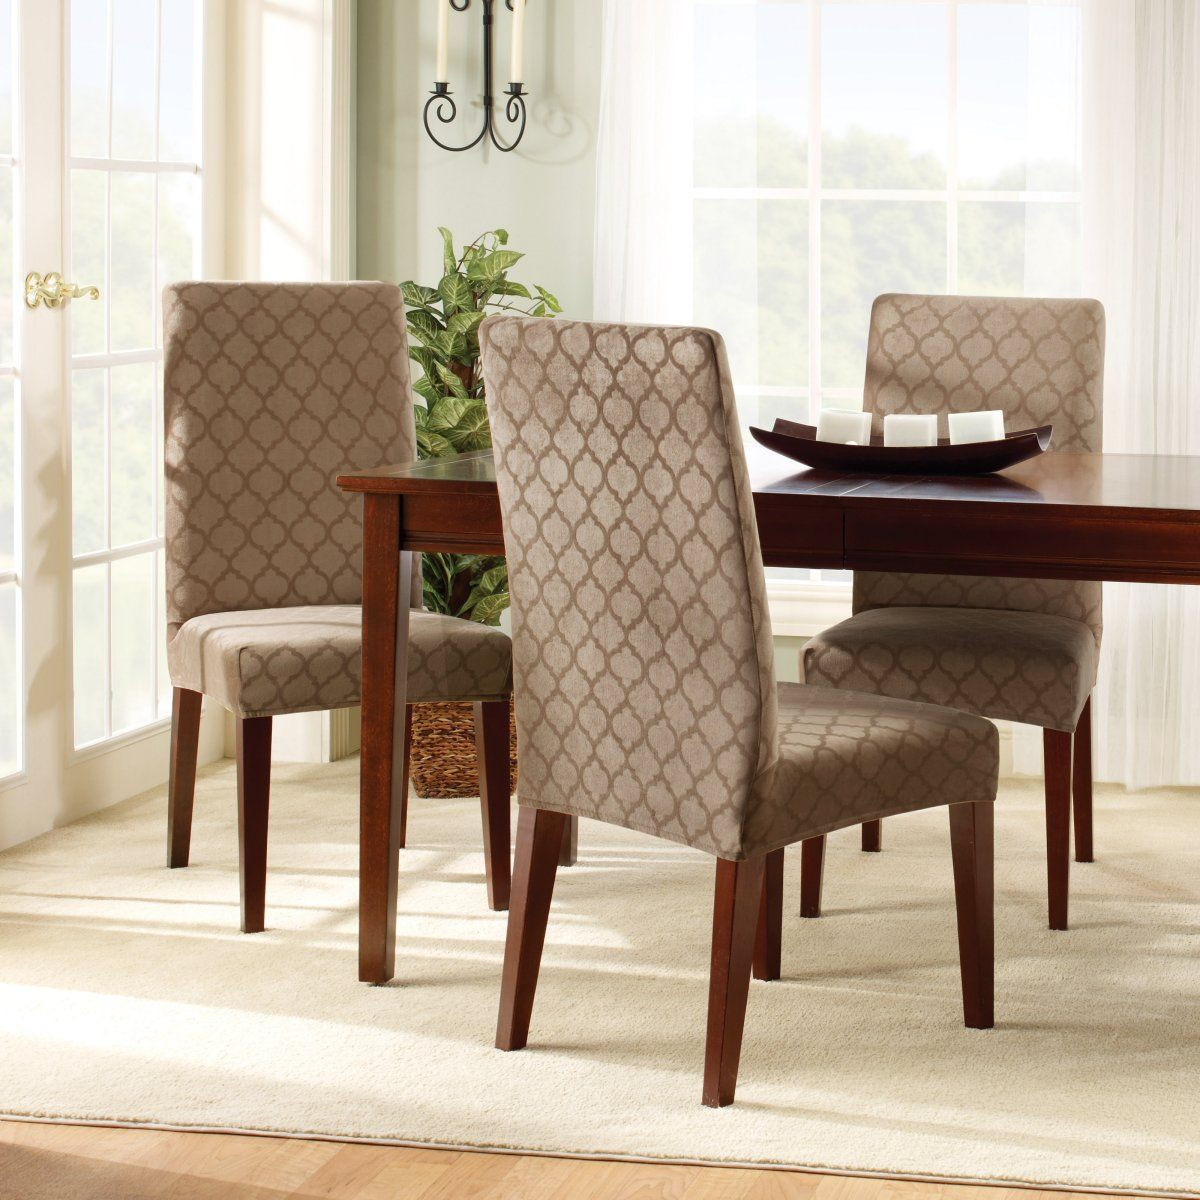 hardwood floor chair protectors of 12 beautiful dining chair slipcover design ideas nice brown with regard to dining room brown dining room chair plus white fur carpet and light wooden floor winning dining room chairs